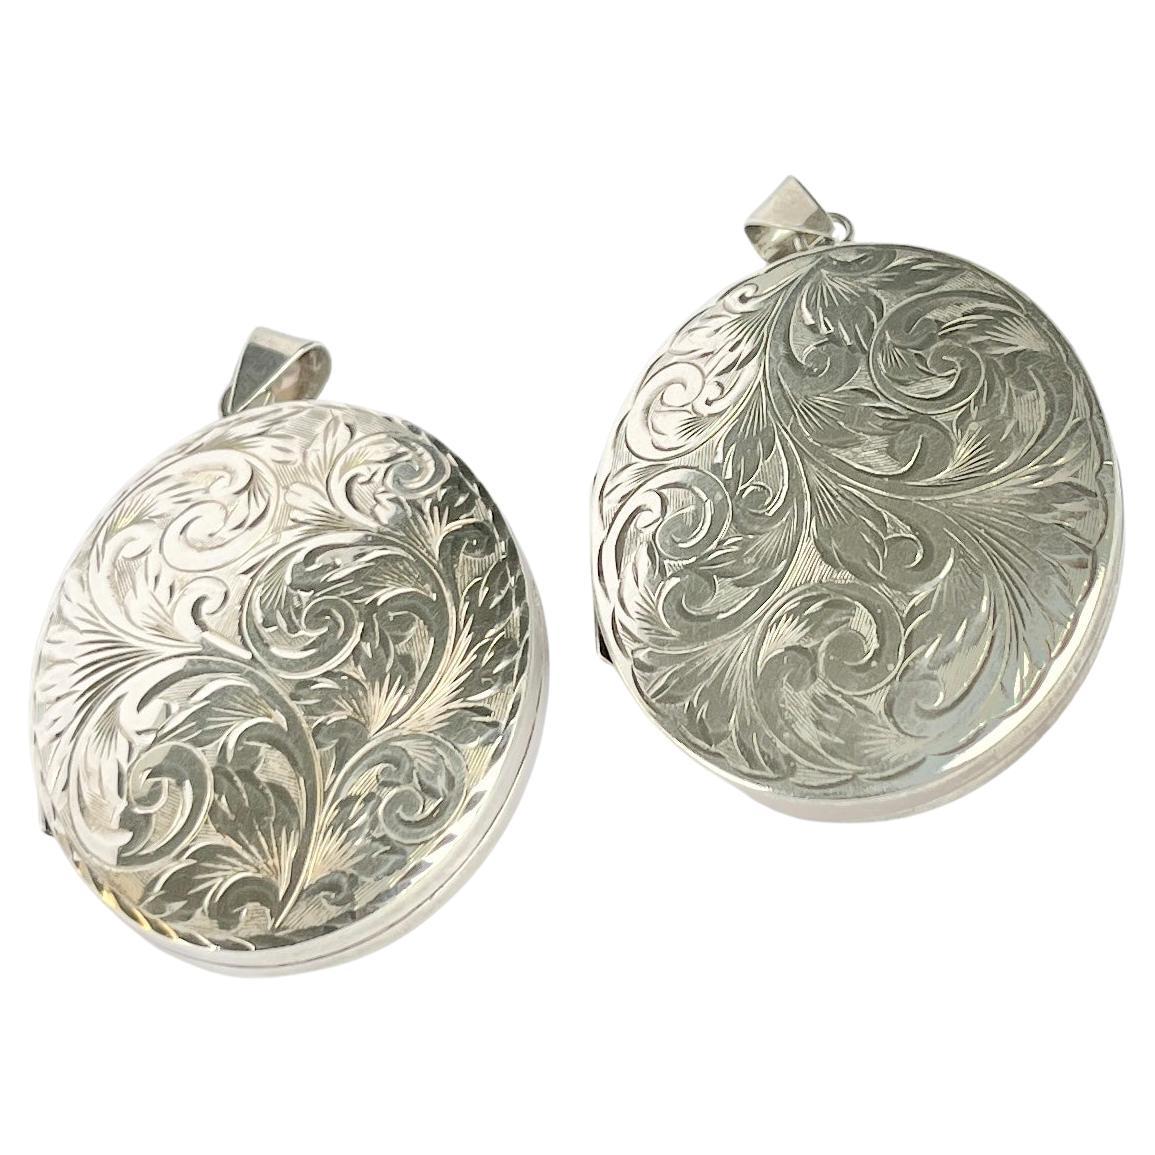 Pair Of Victorian Silver Aesthetic Lockets